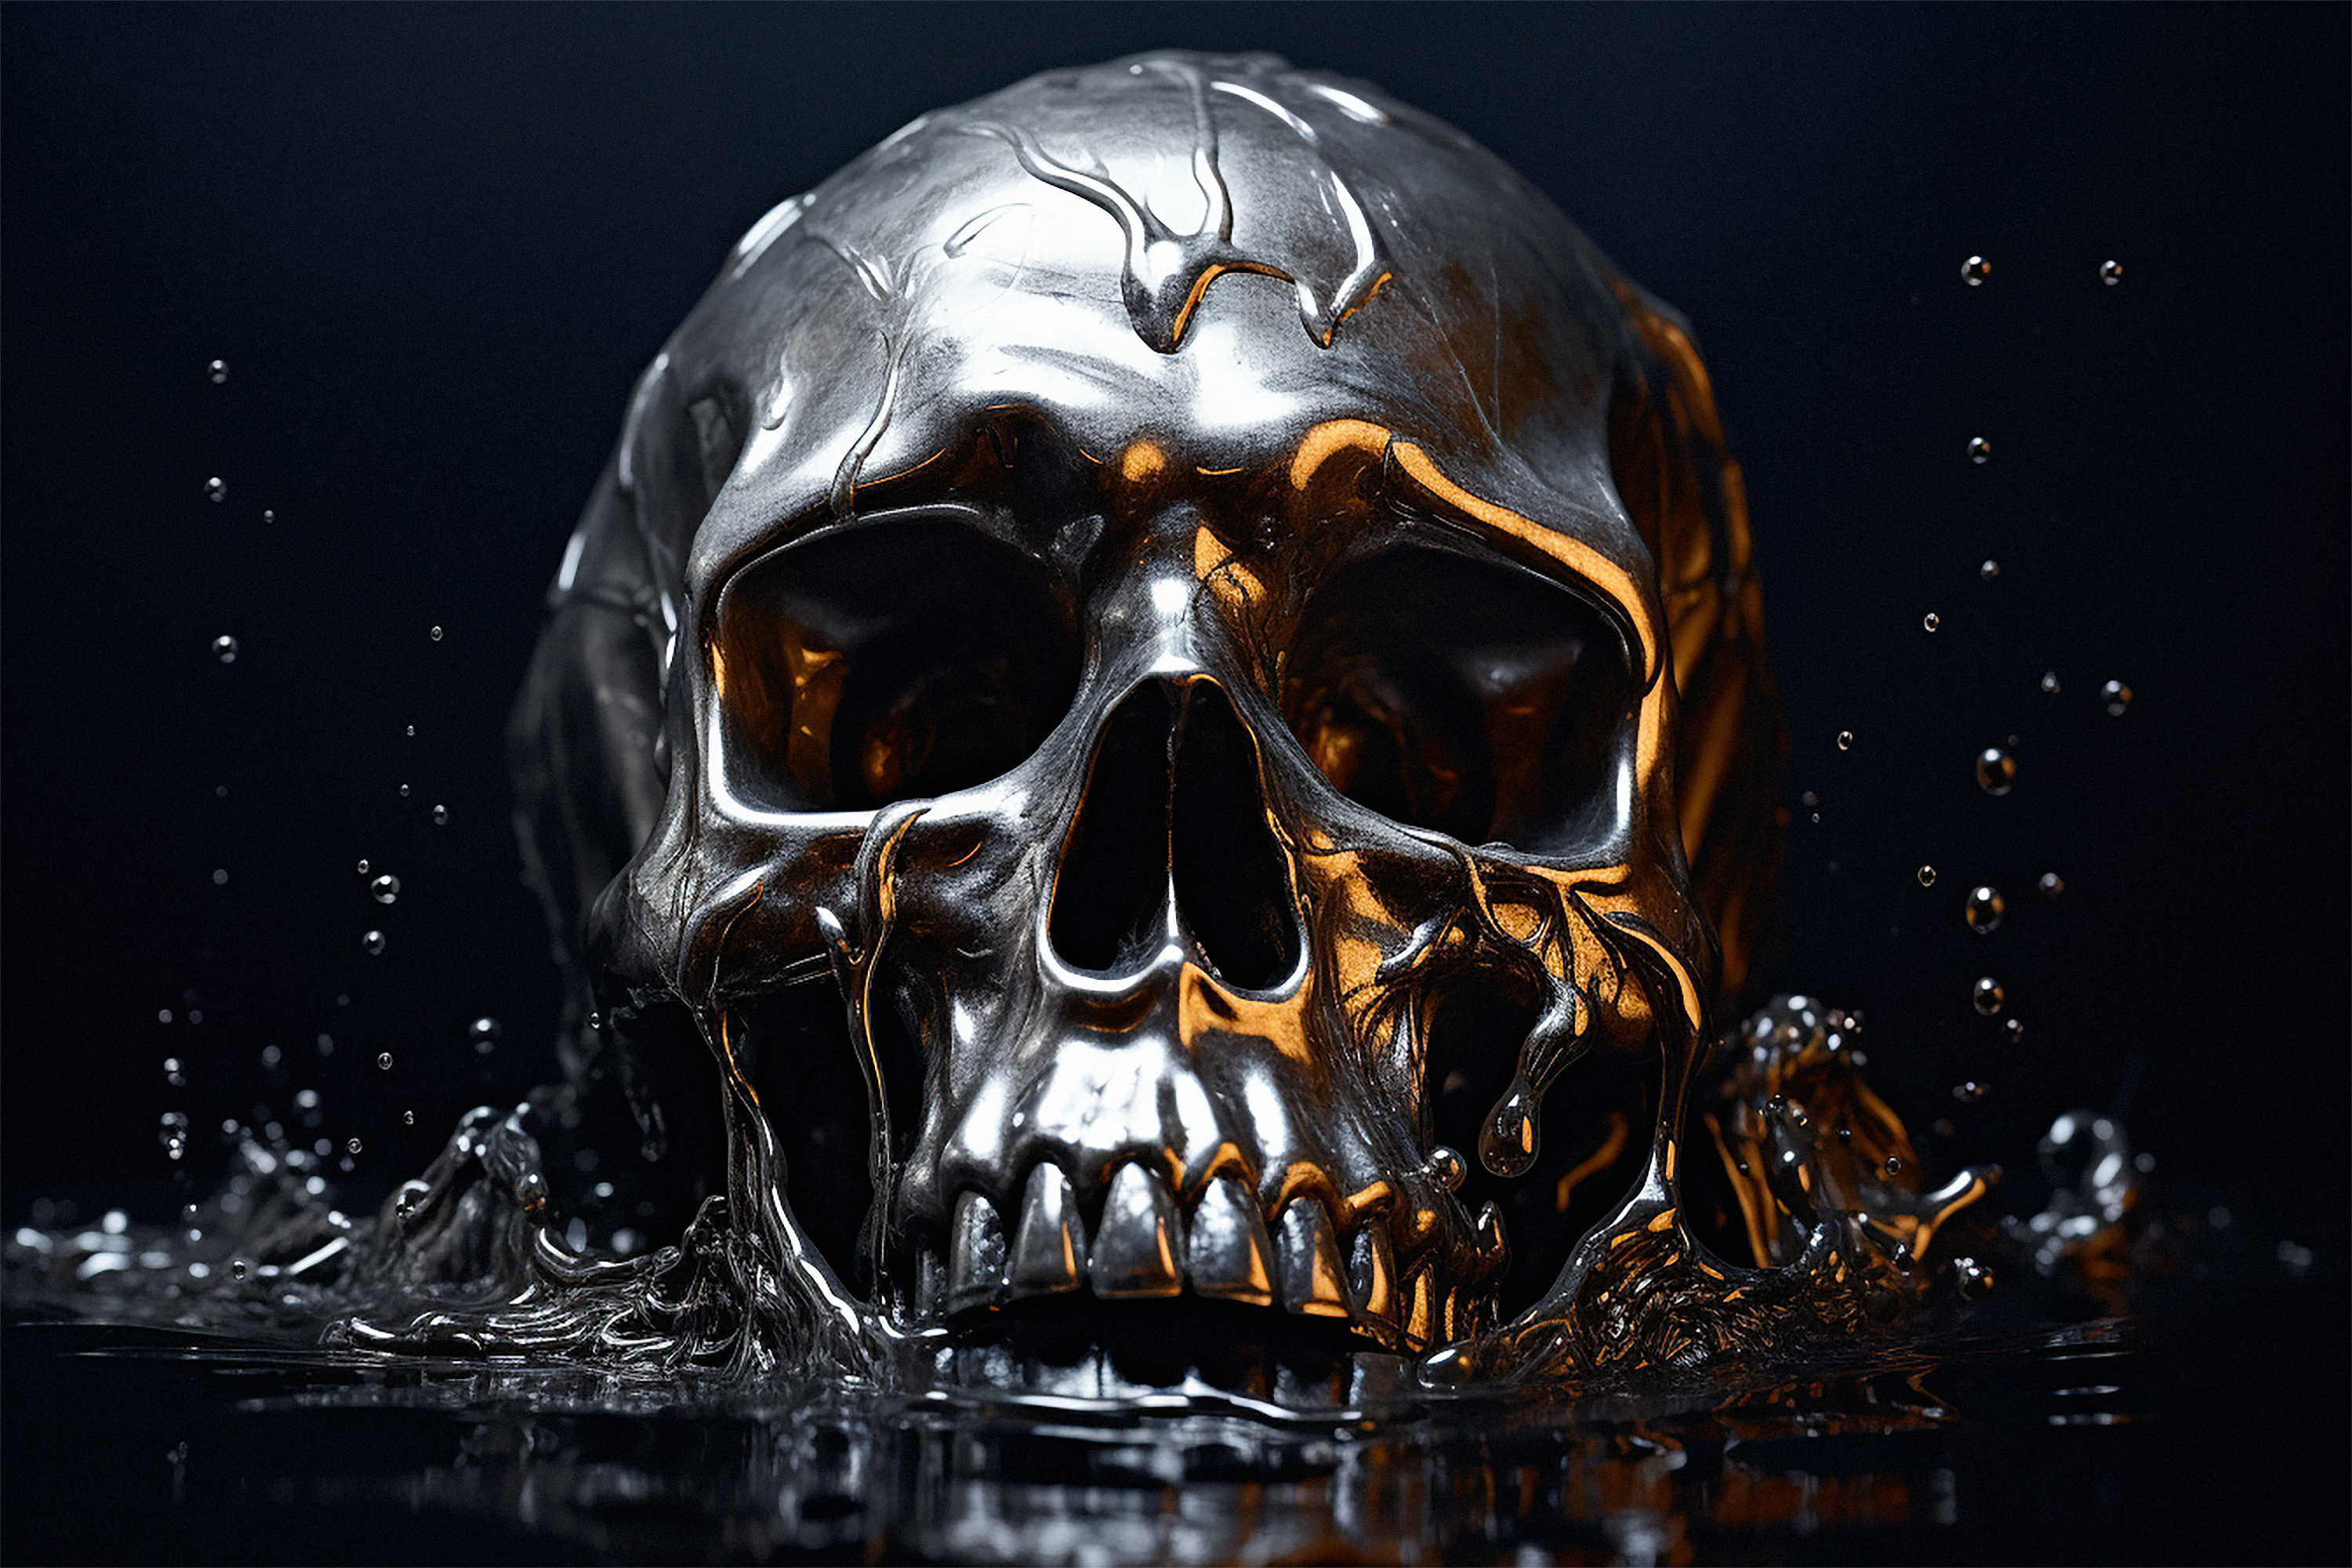 A chromed iron skull in the water